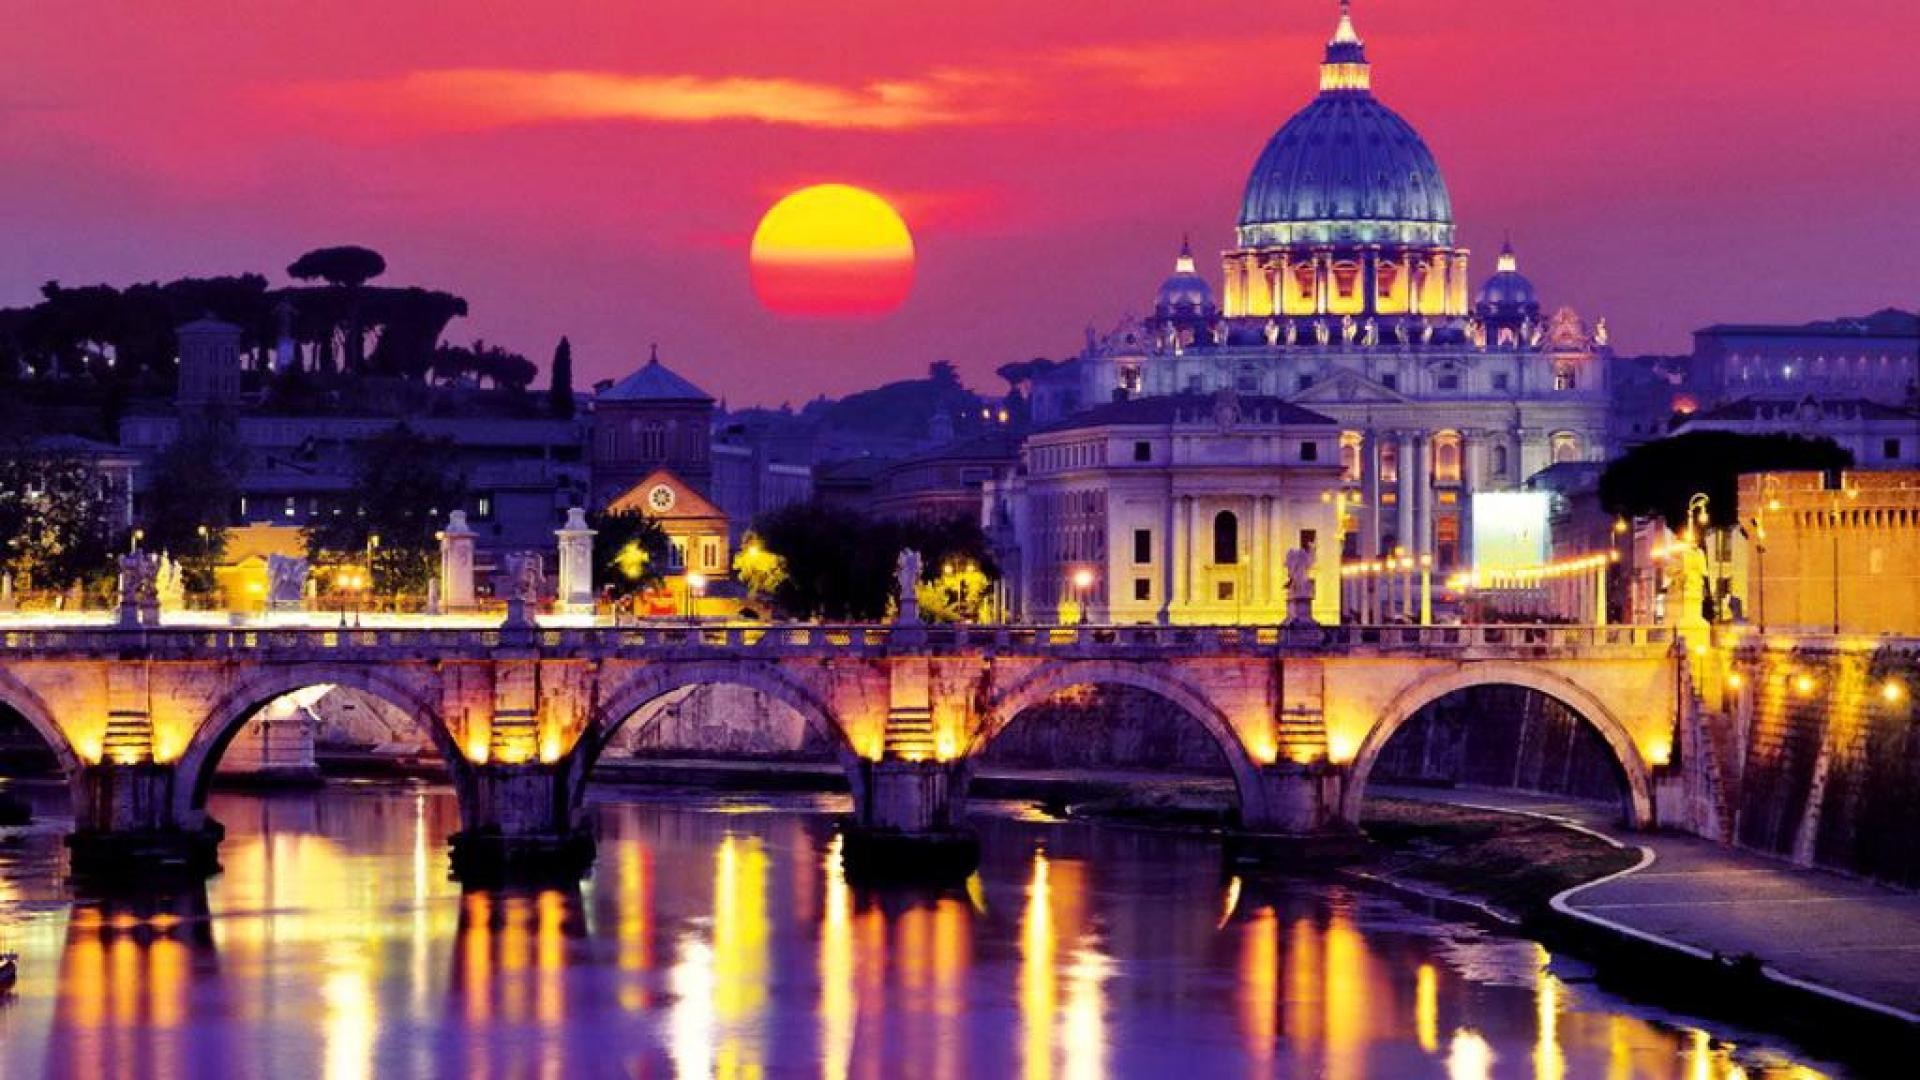 Roma Wallpaper 66 Pictures